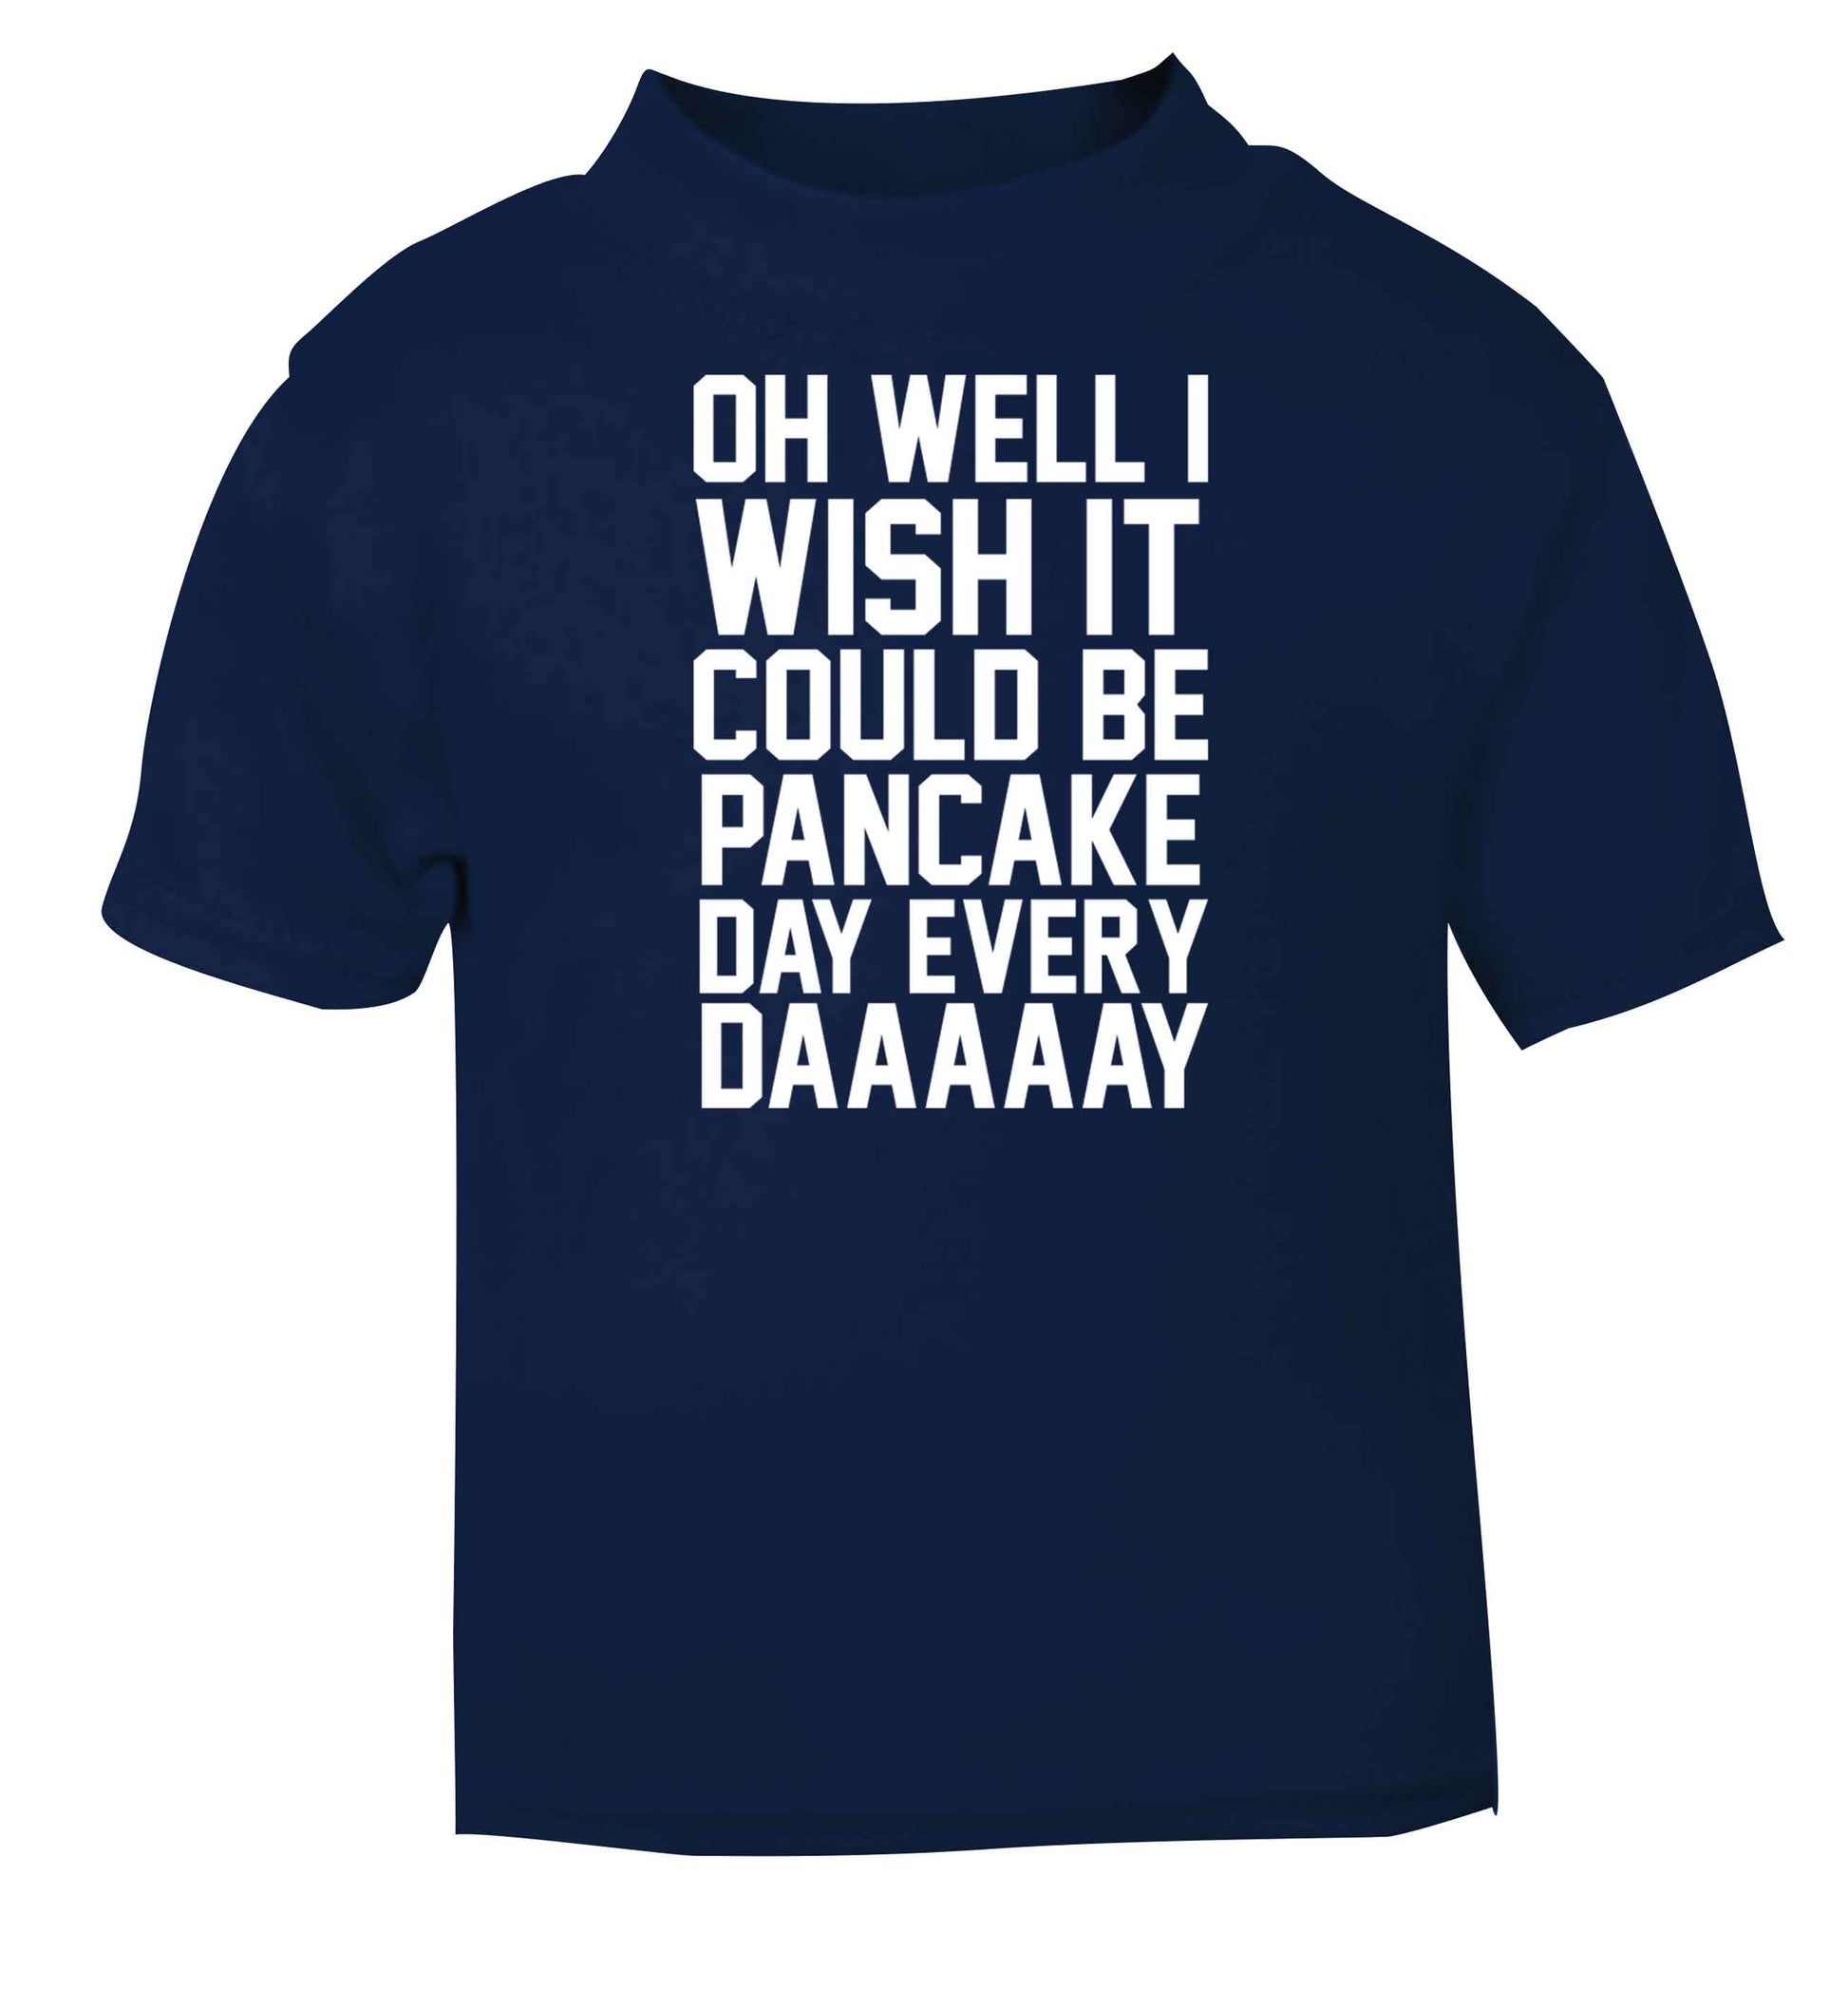 Oh well I wish it could be pancake day every day navy baby toddler Tshirt 2 Years